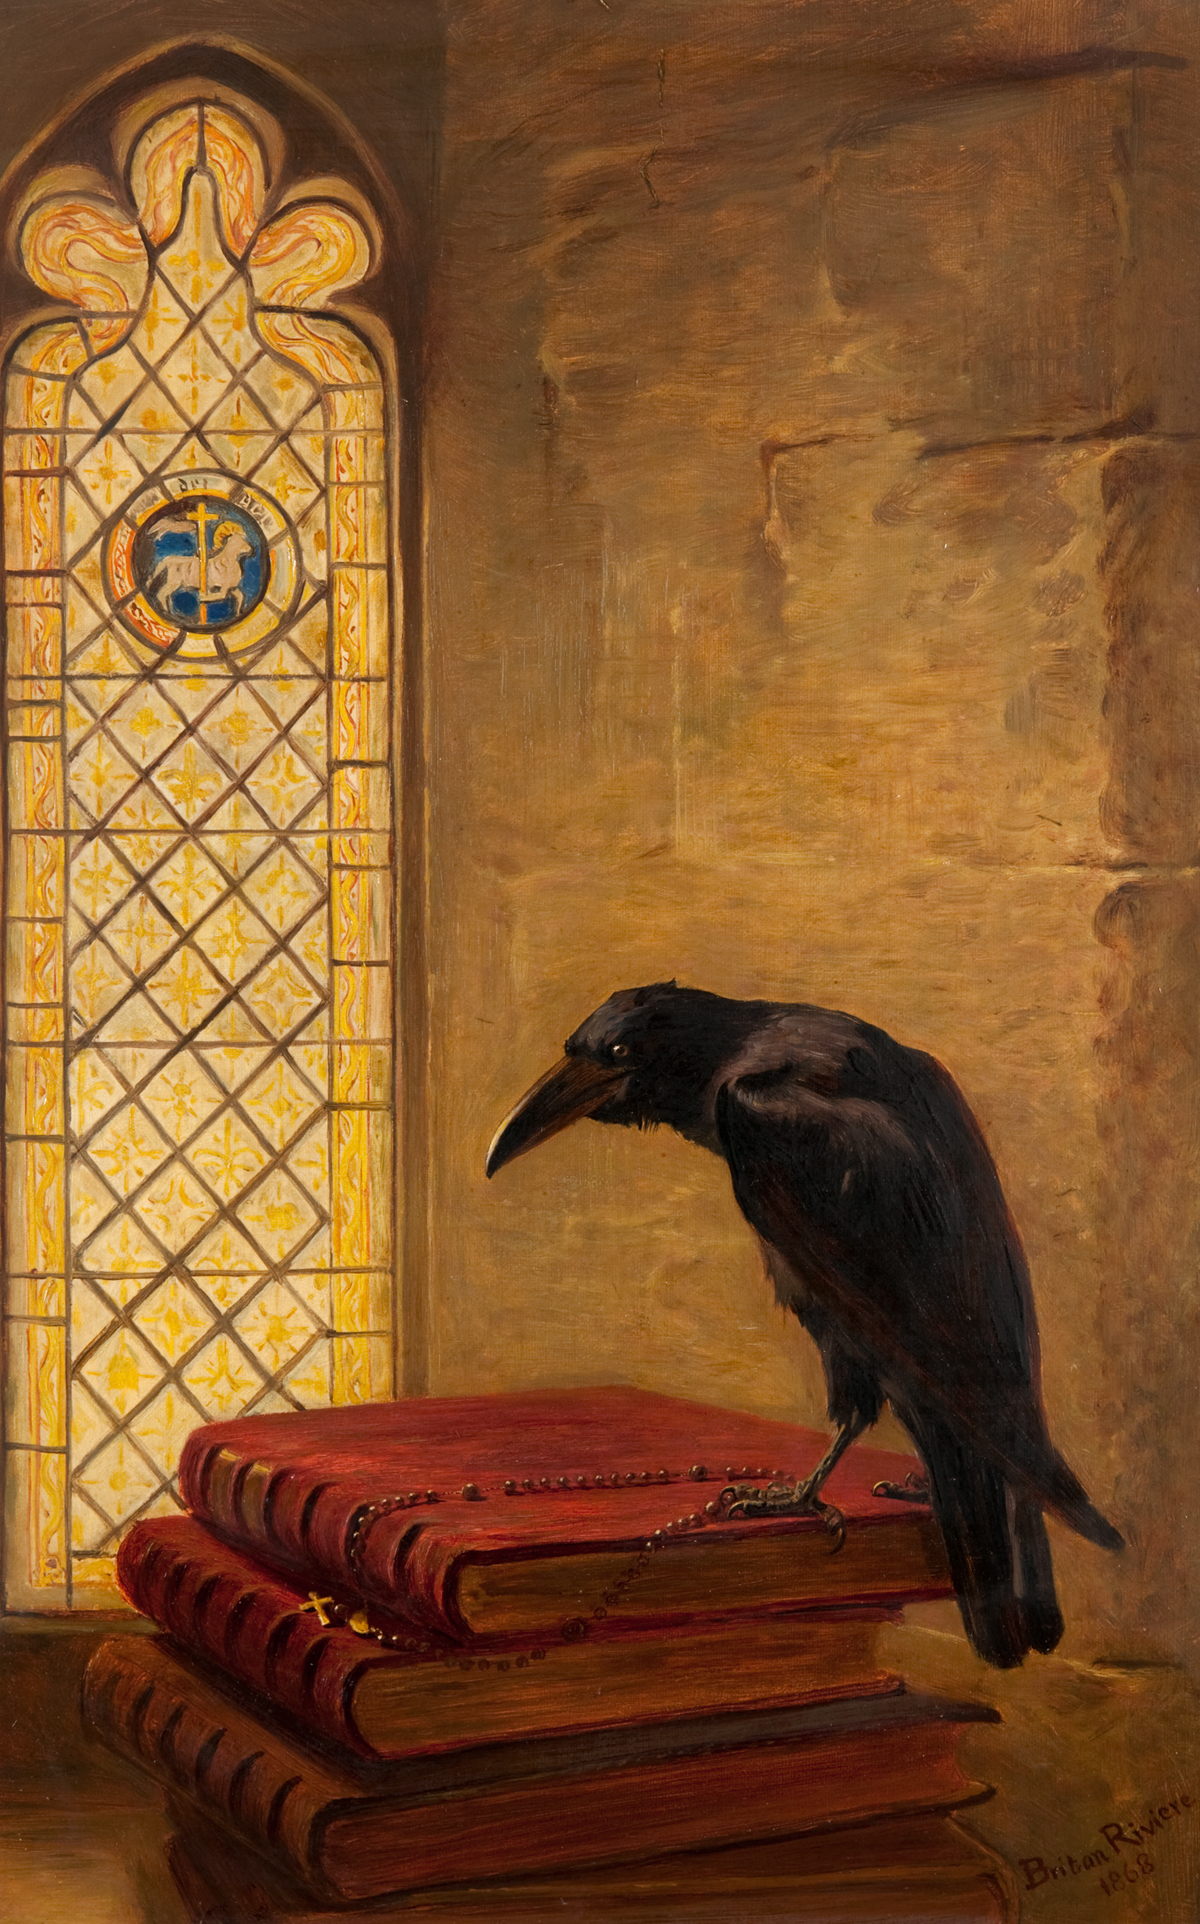 A crow perched on a pile of three books before a cathedral window